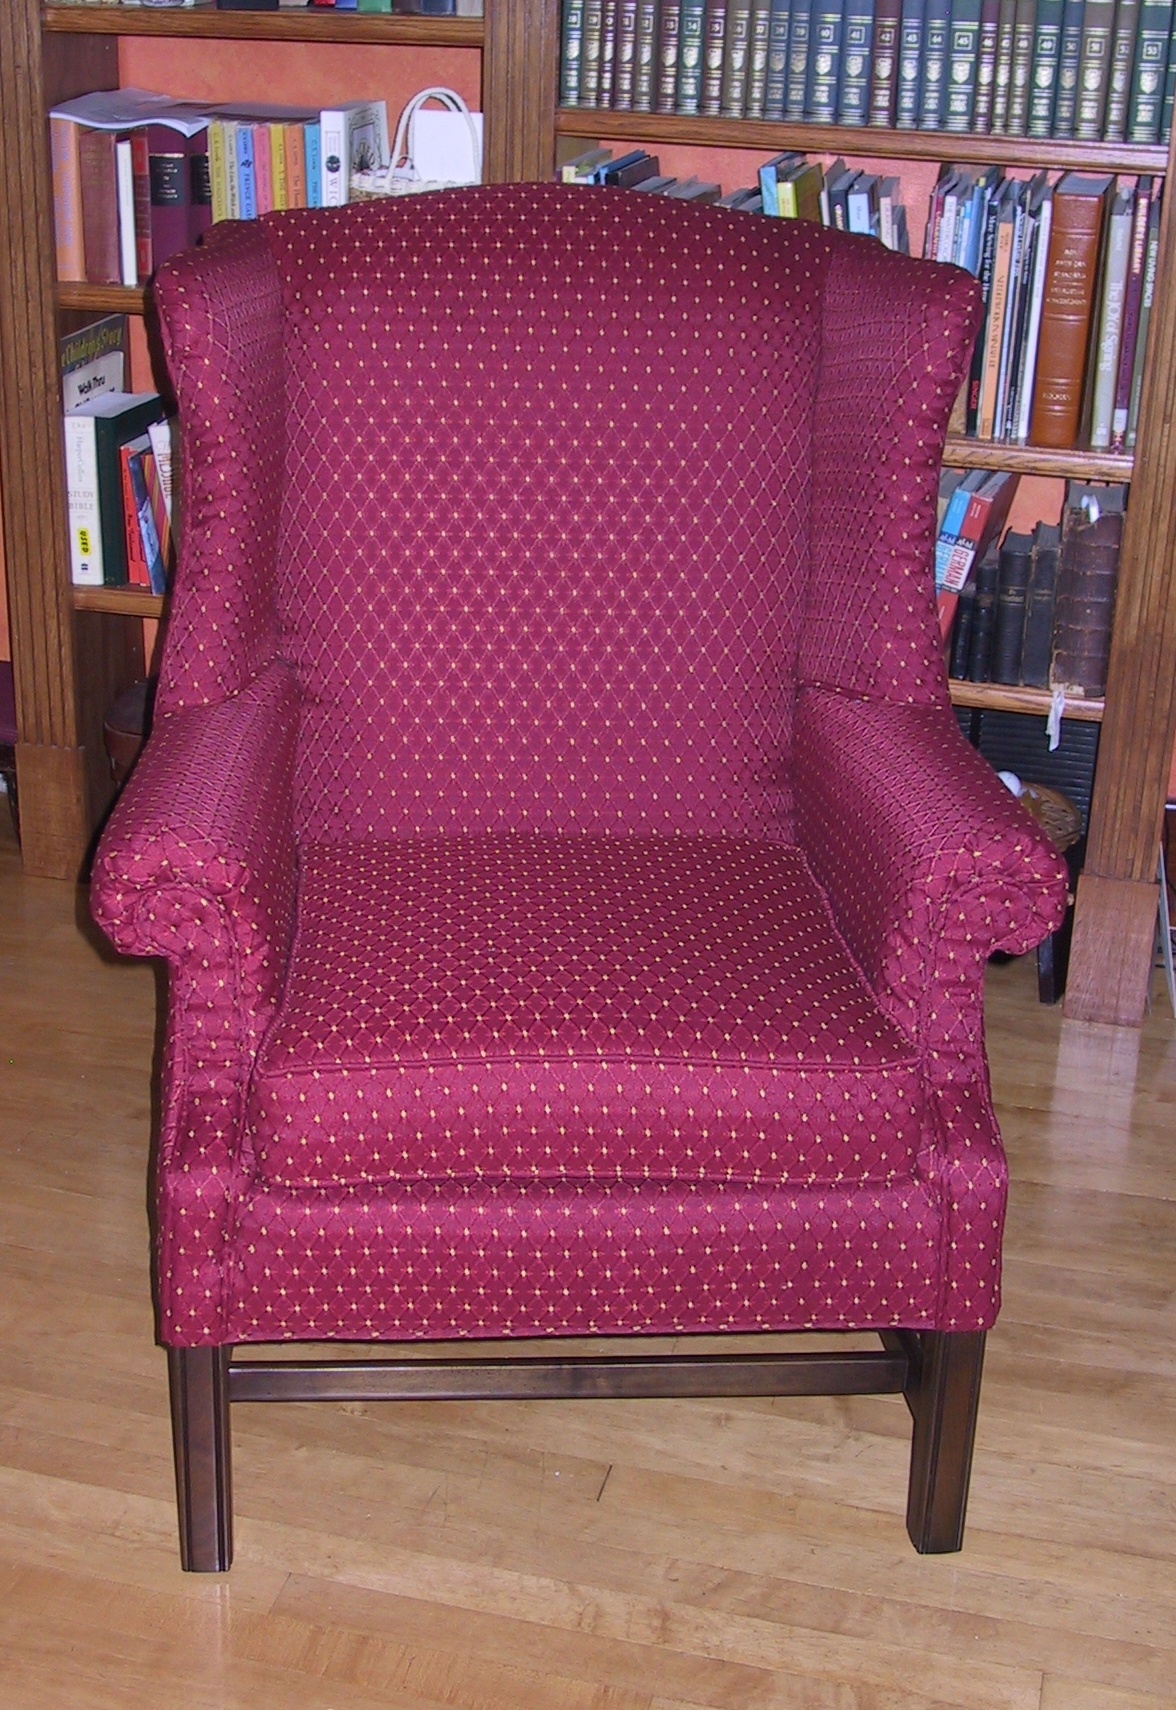 Similar fabric sharpens up this delightful wing chair